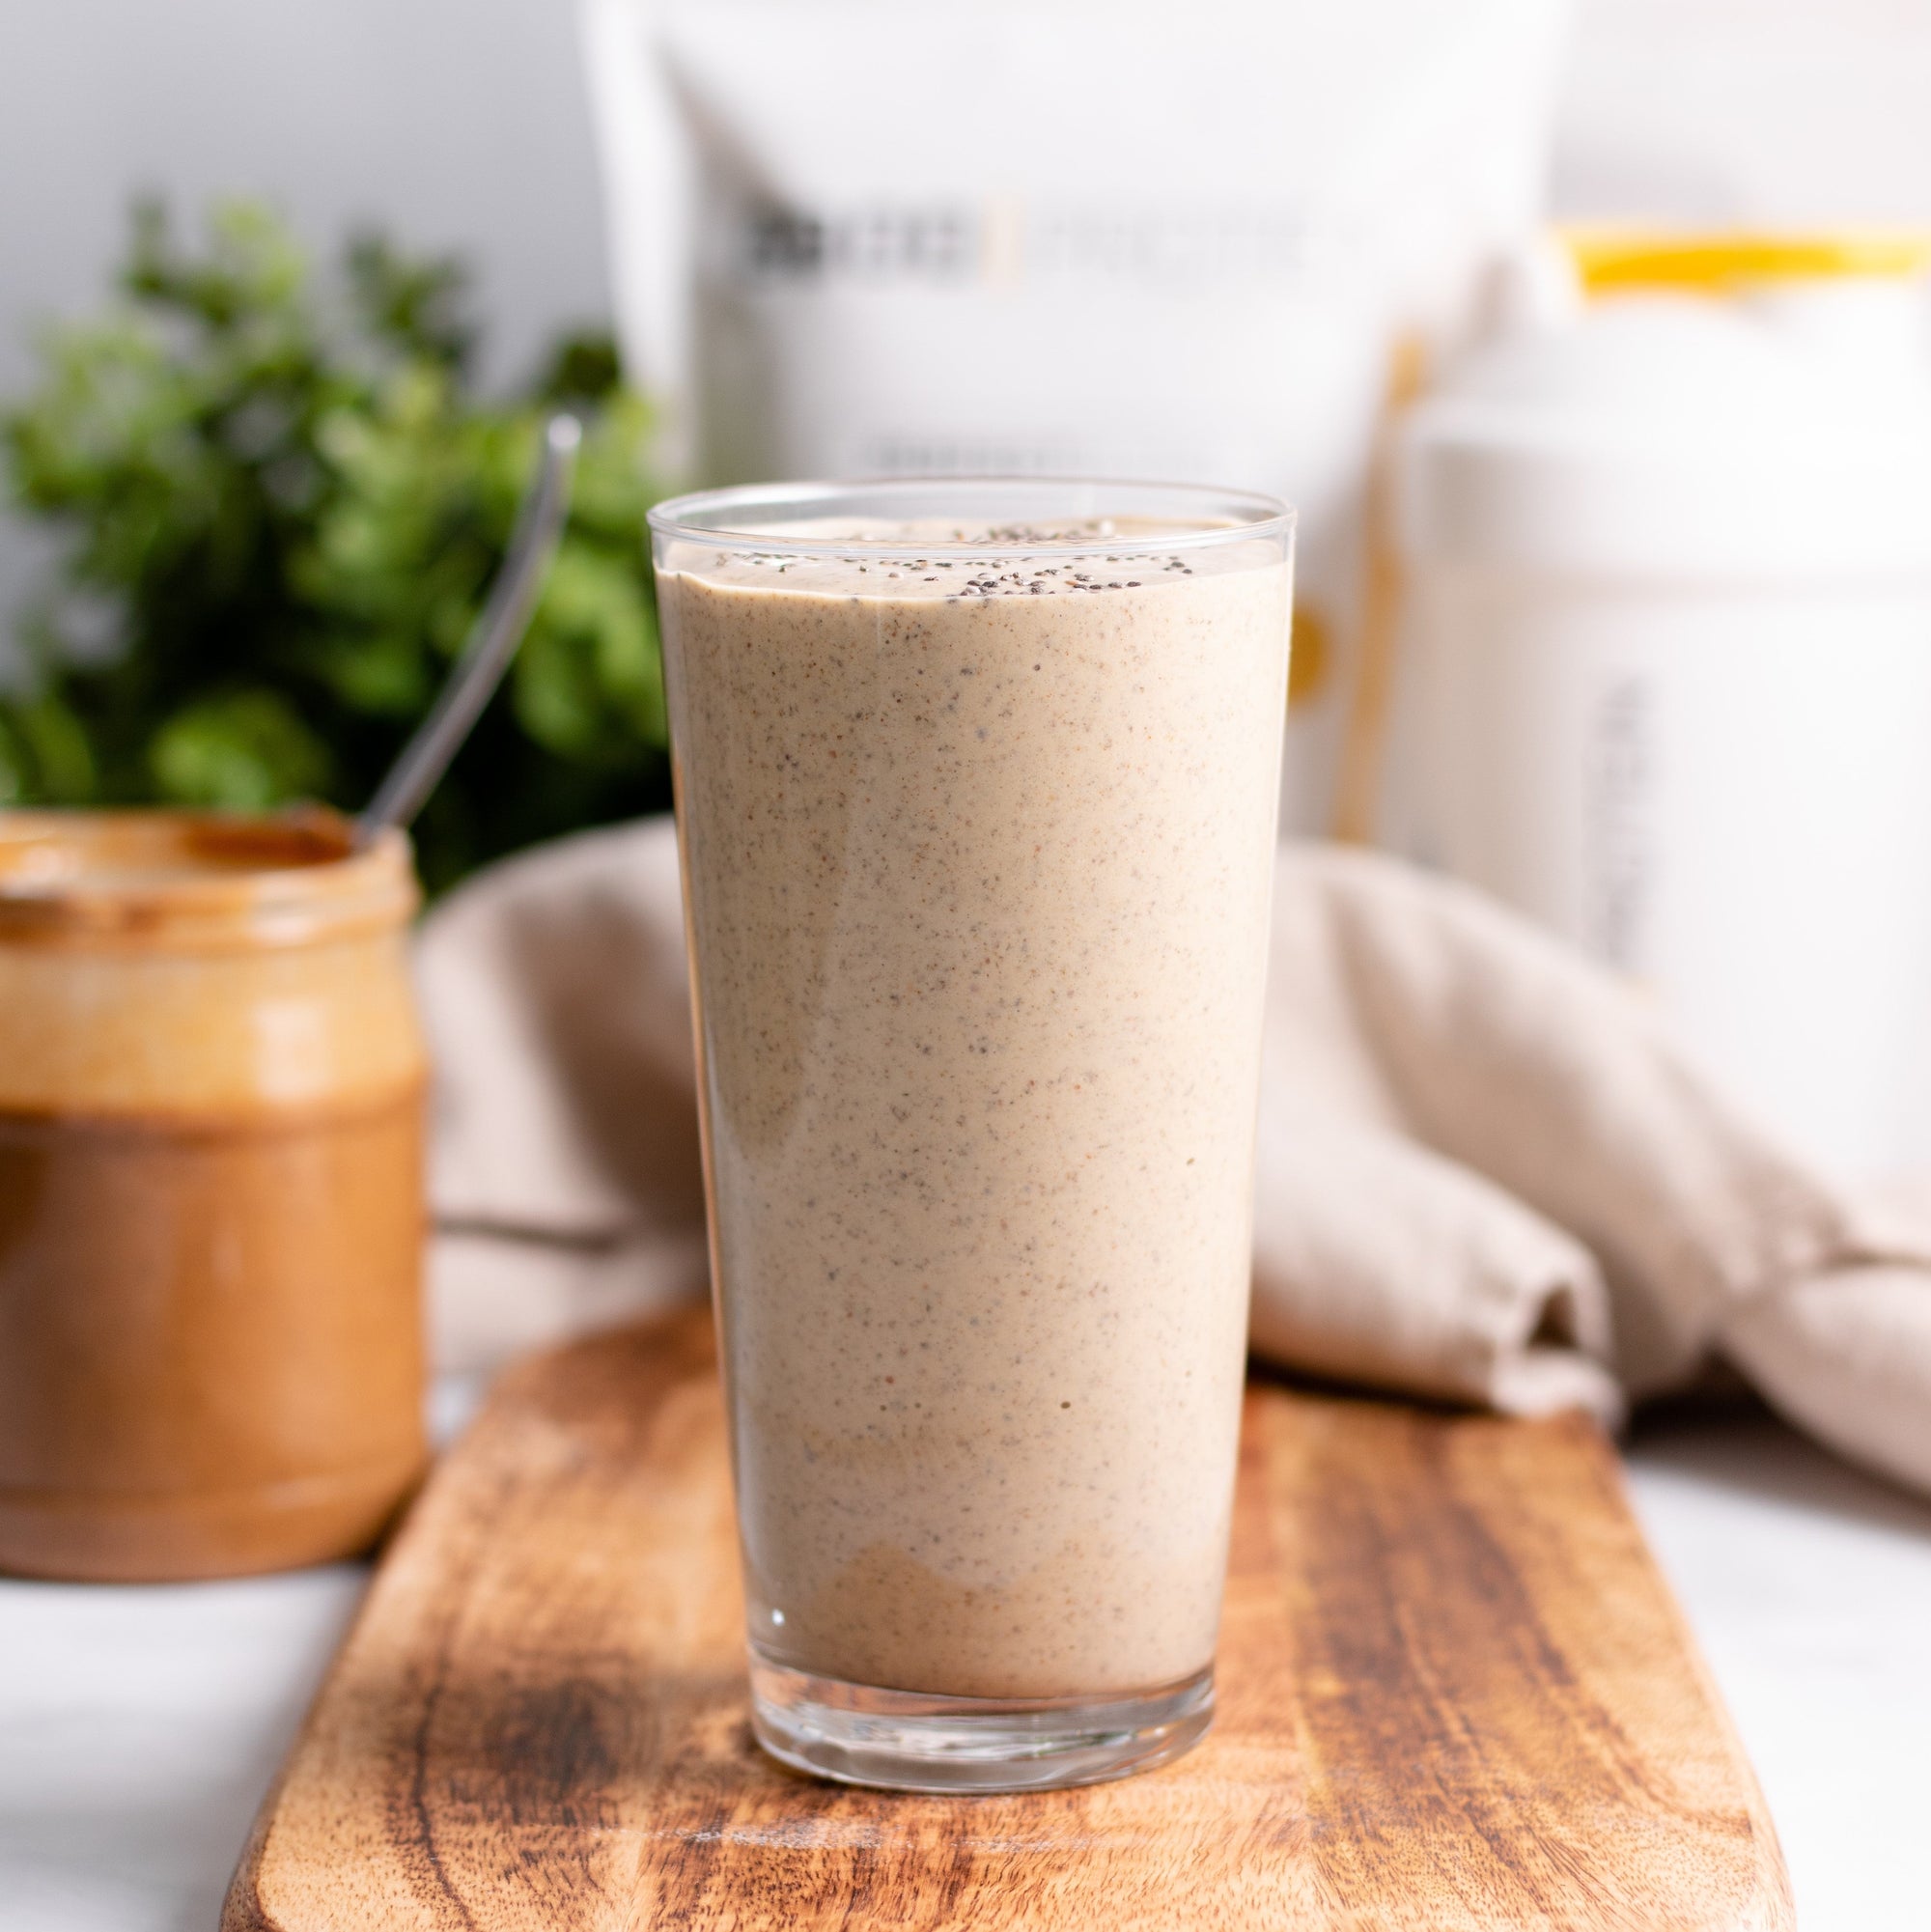 Salted Caramel, Almond Butter & Chia Smoothie - Good Protein